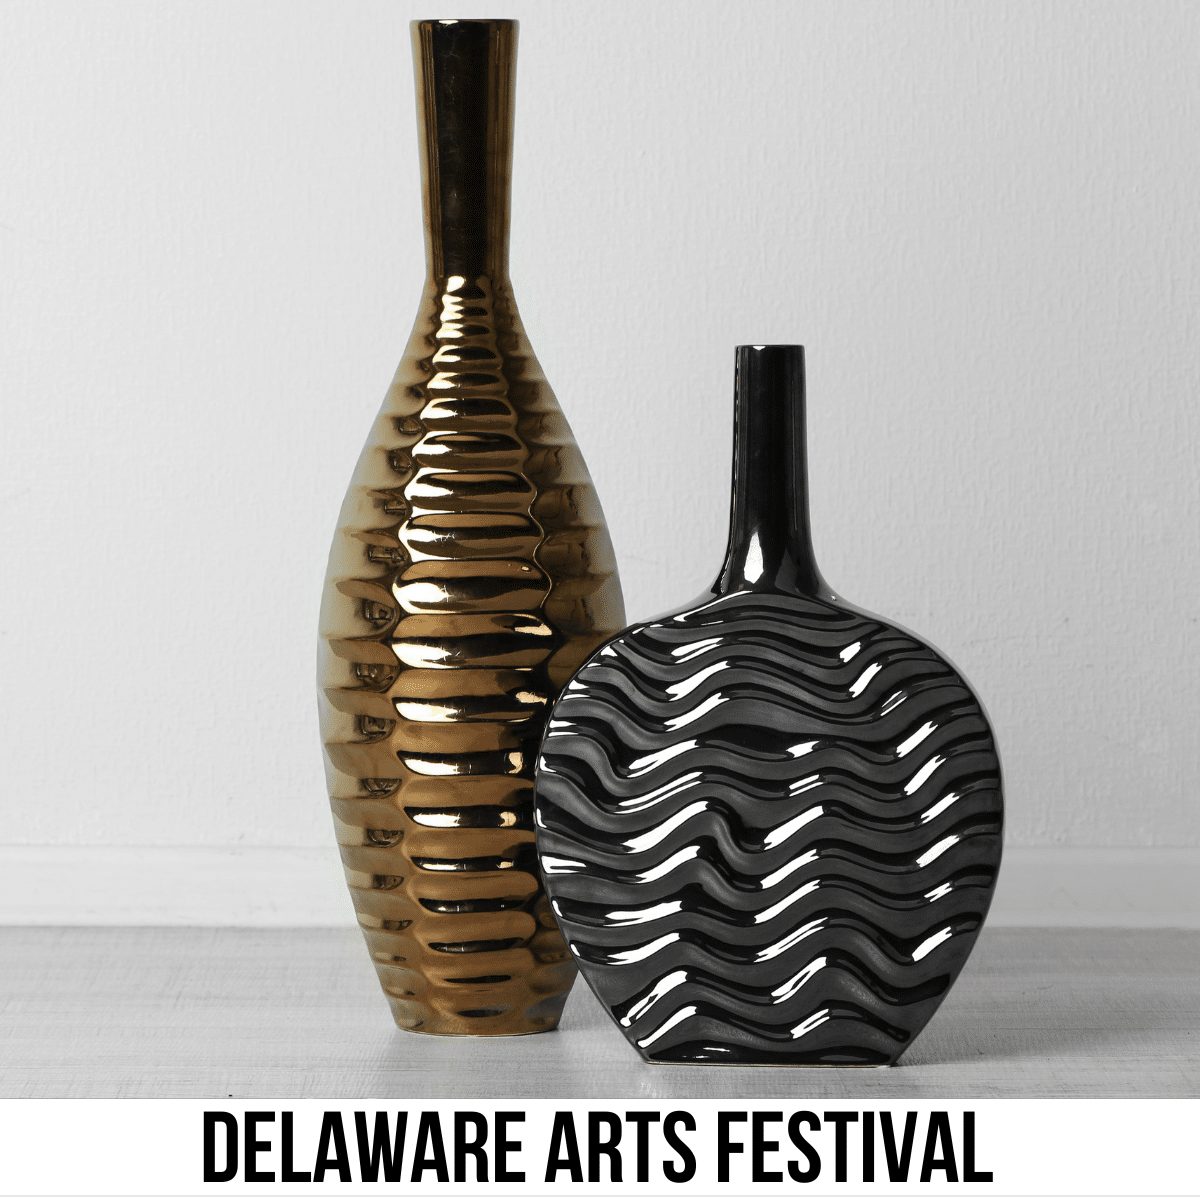 A square image of a photo of two vases, a shorter, rounder vase and a taller, thinner vase, both with a ridge design and a metal-colored finish-one is gray and the other is bronze. A white strip across the bottom has text Delaware Arts Festival